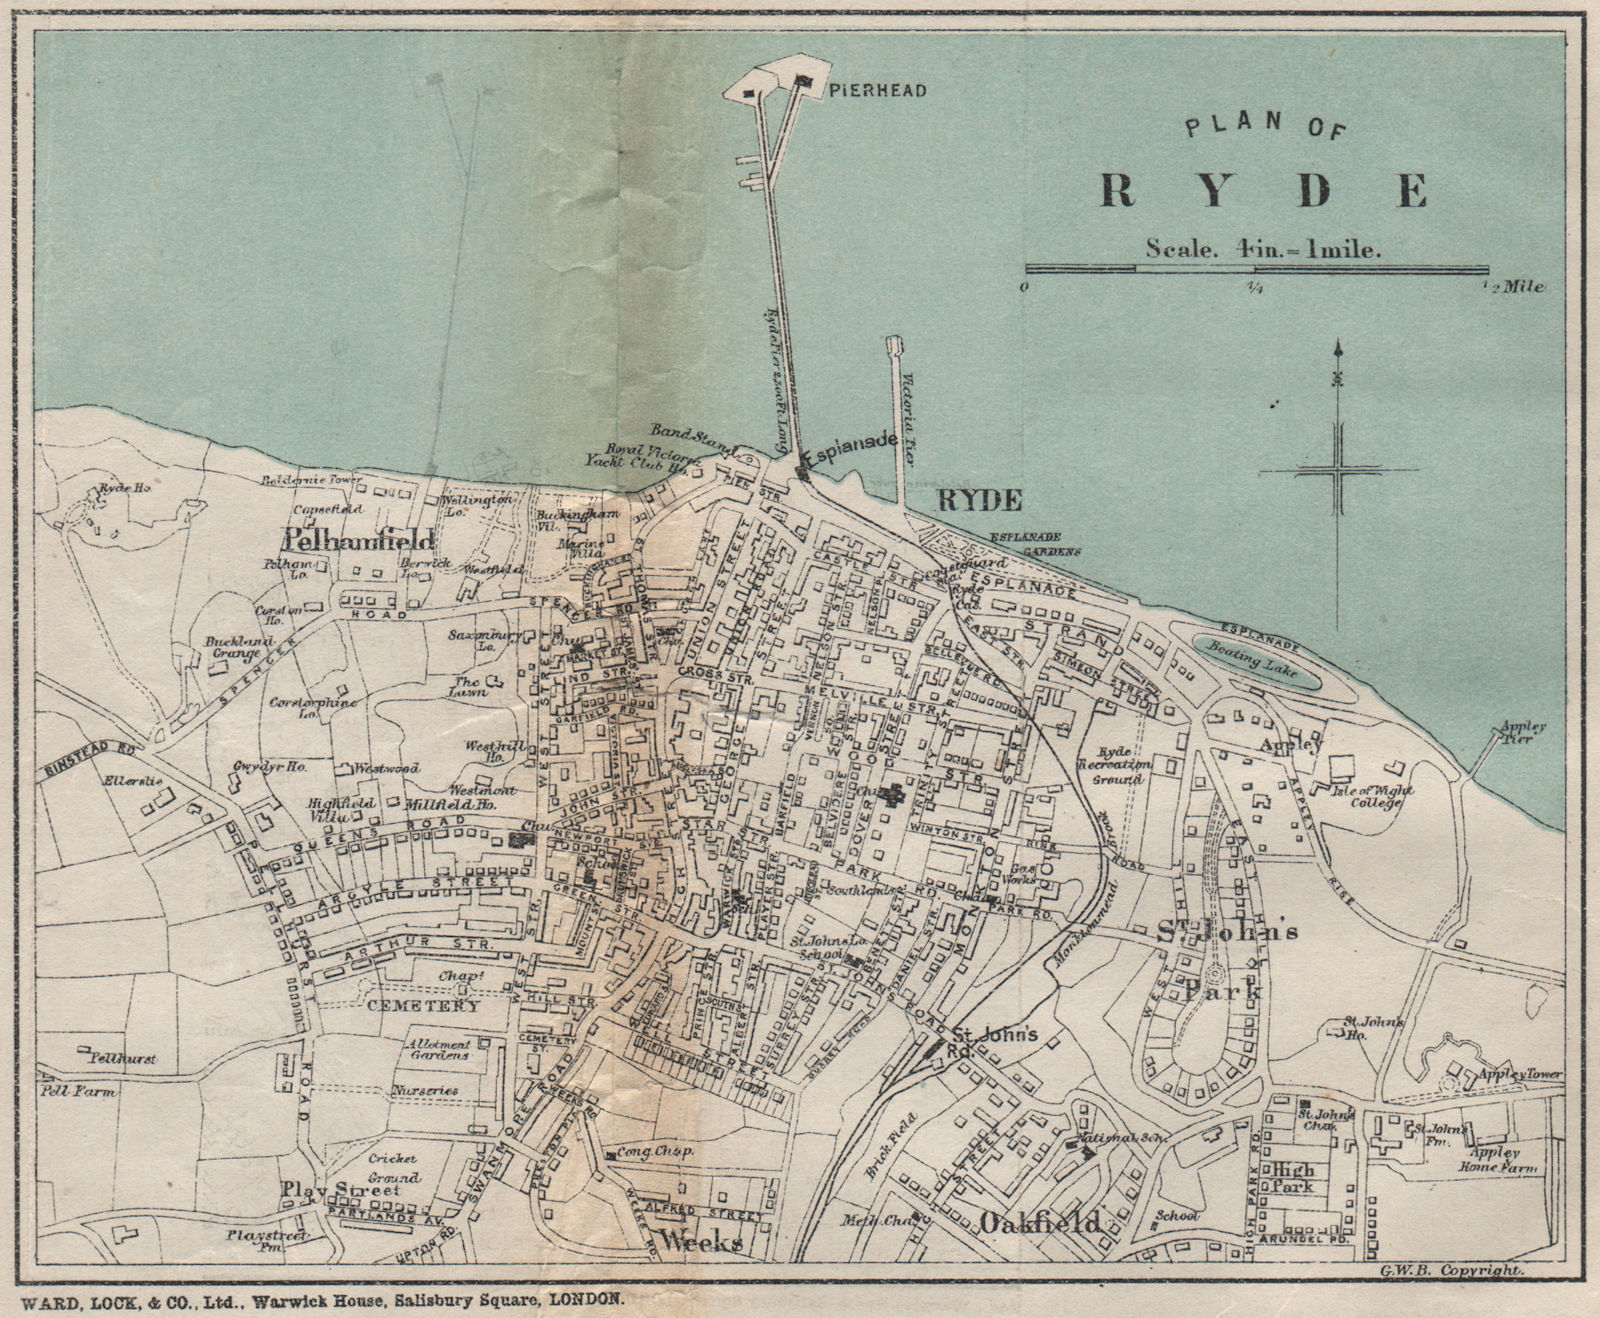 Associate Product RYDE vintage town/city plan. Isle of Wight. WARD LOCK 1908 old antique map